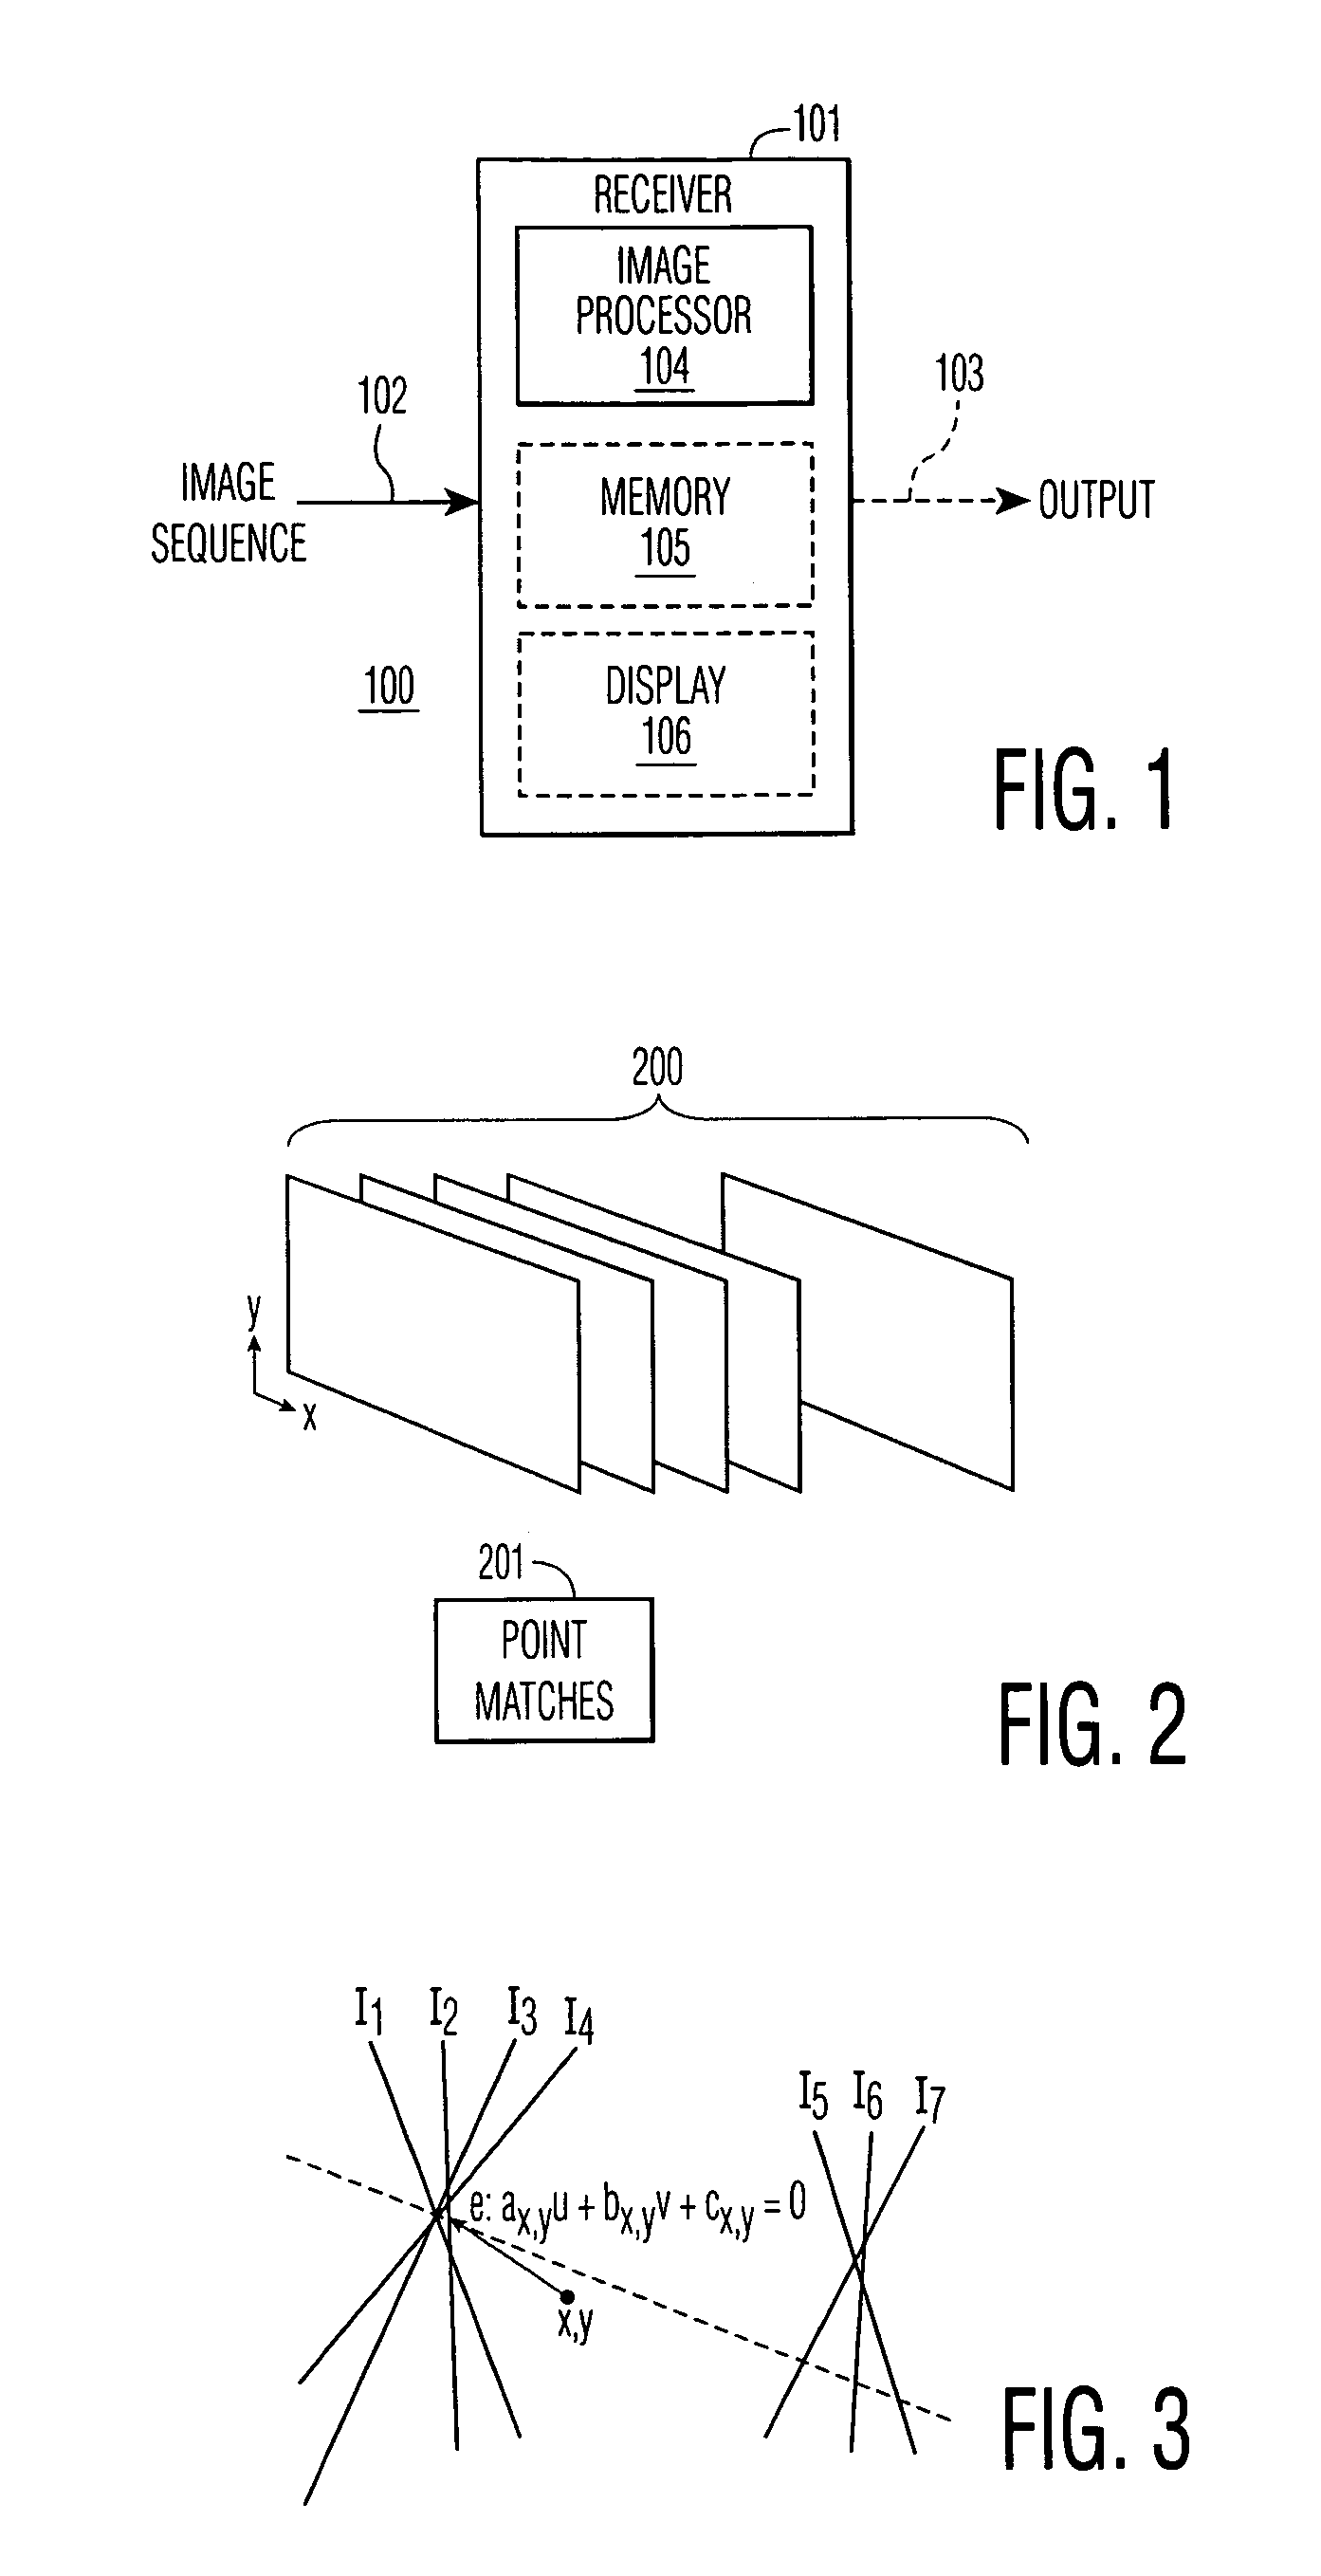 Method for computing optical flow under the epipolar constraint